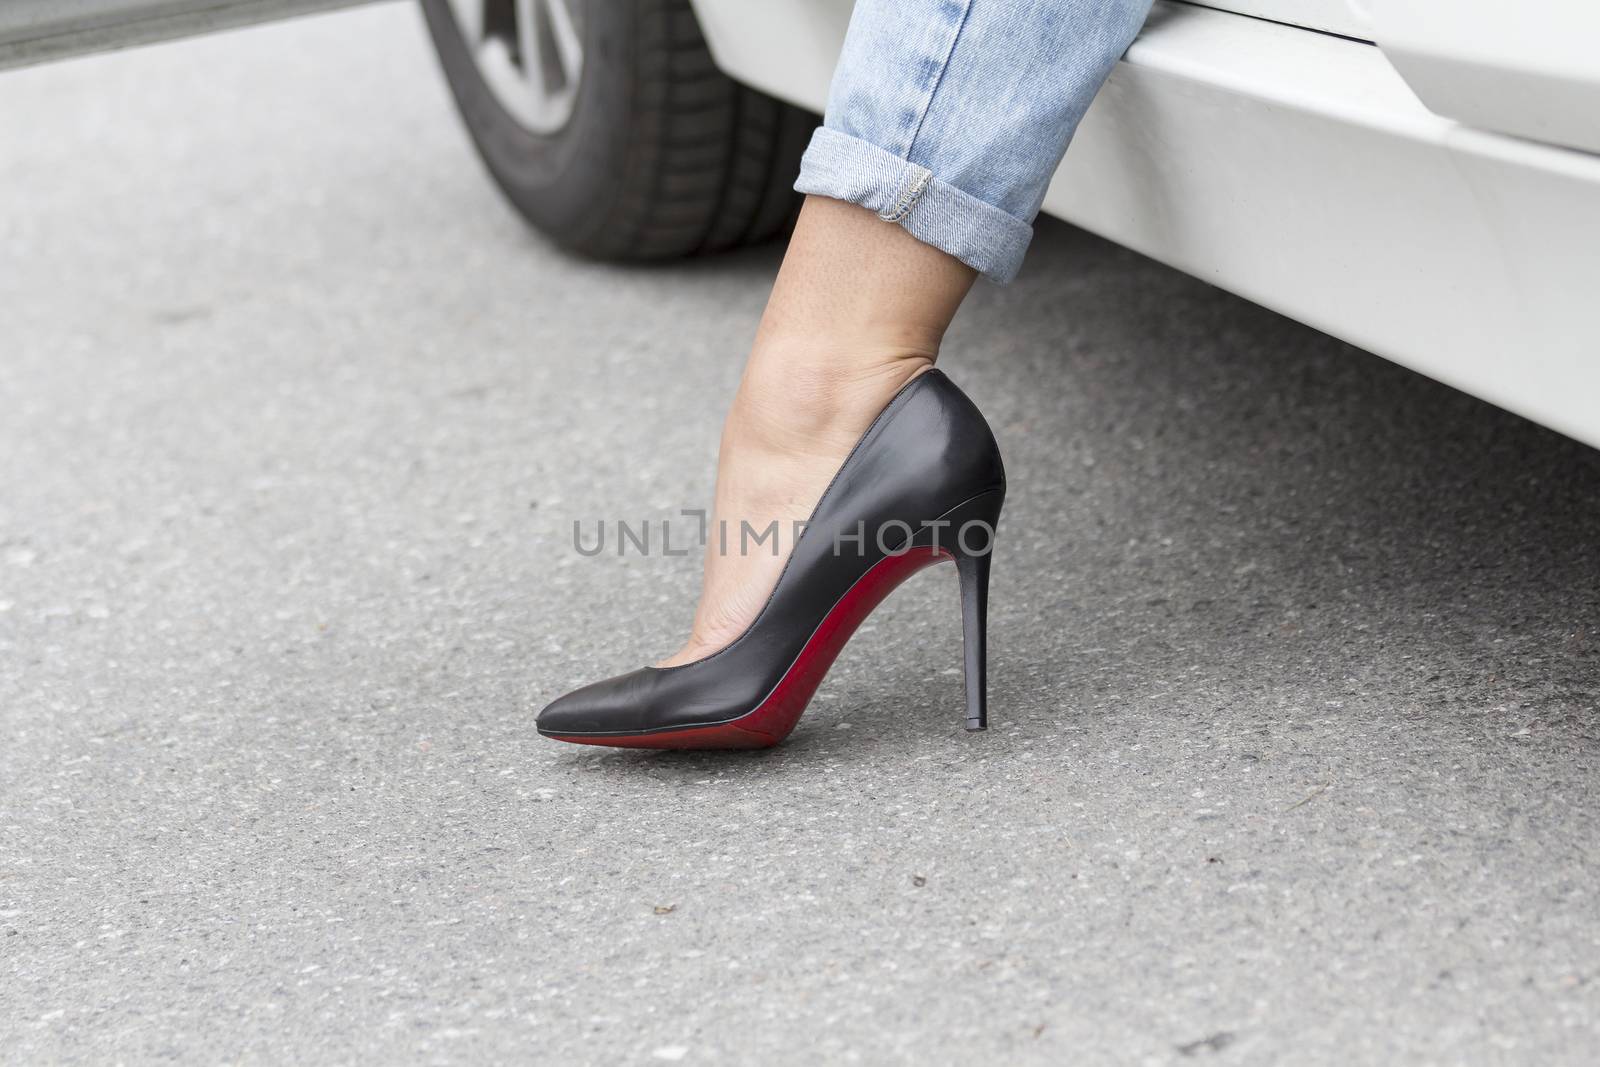 Feet girl in fashionable shoes near a car close-up on the road